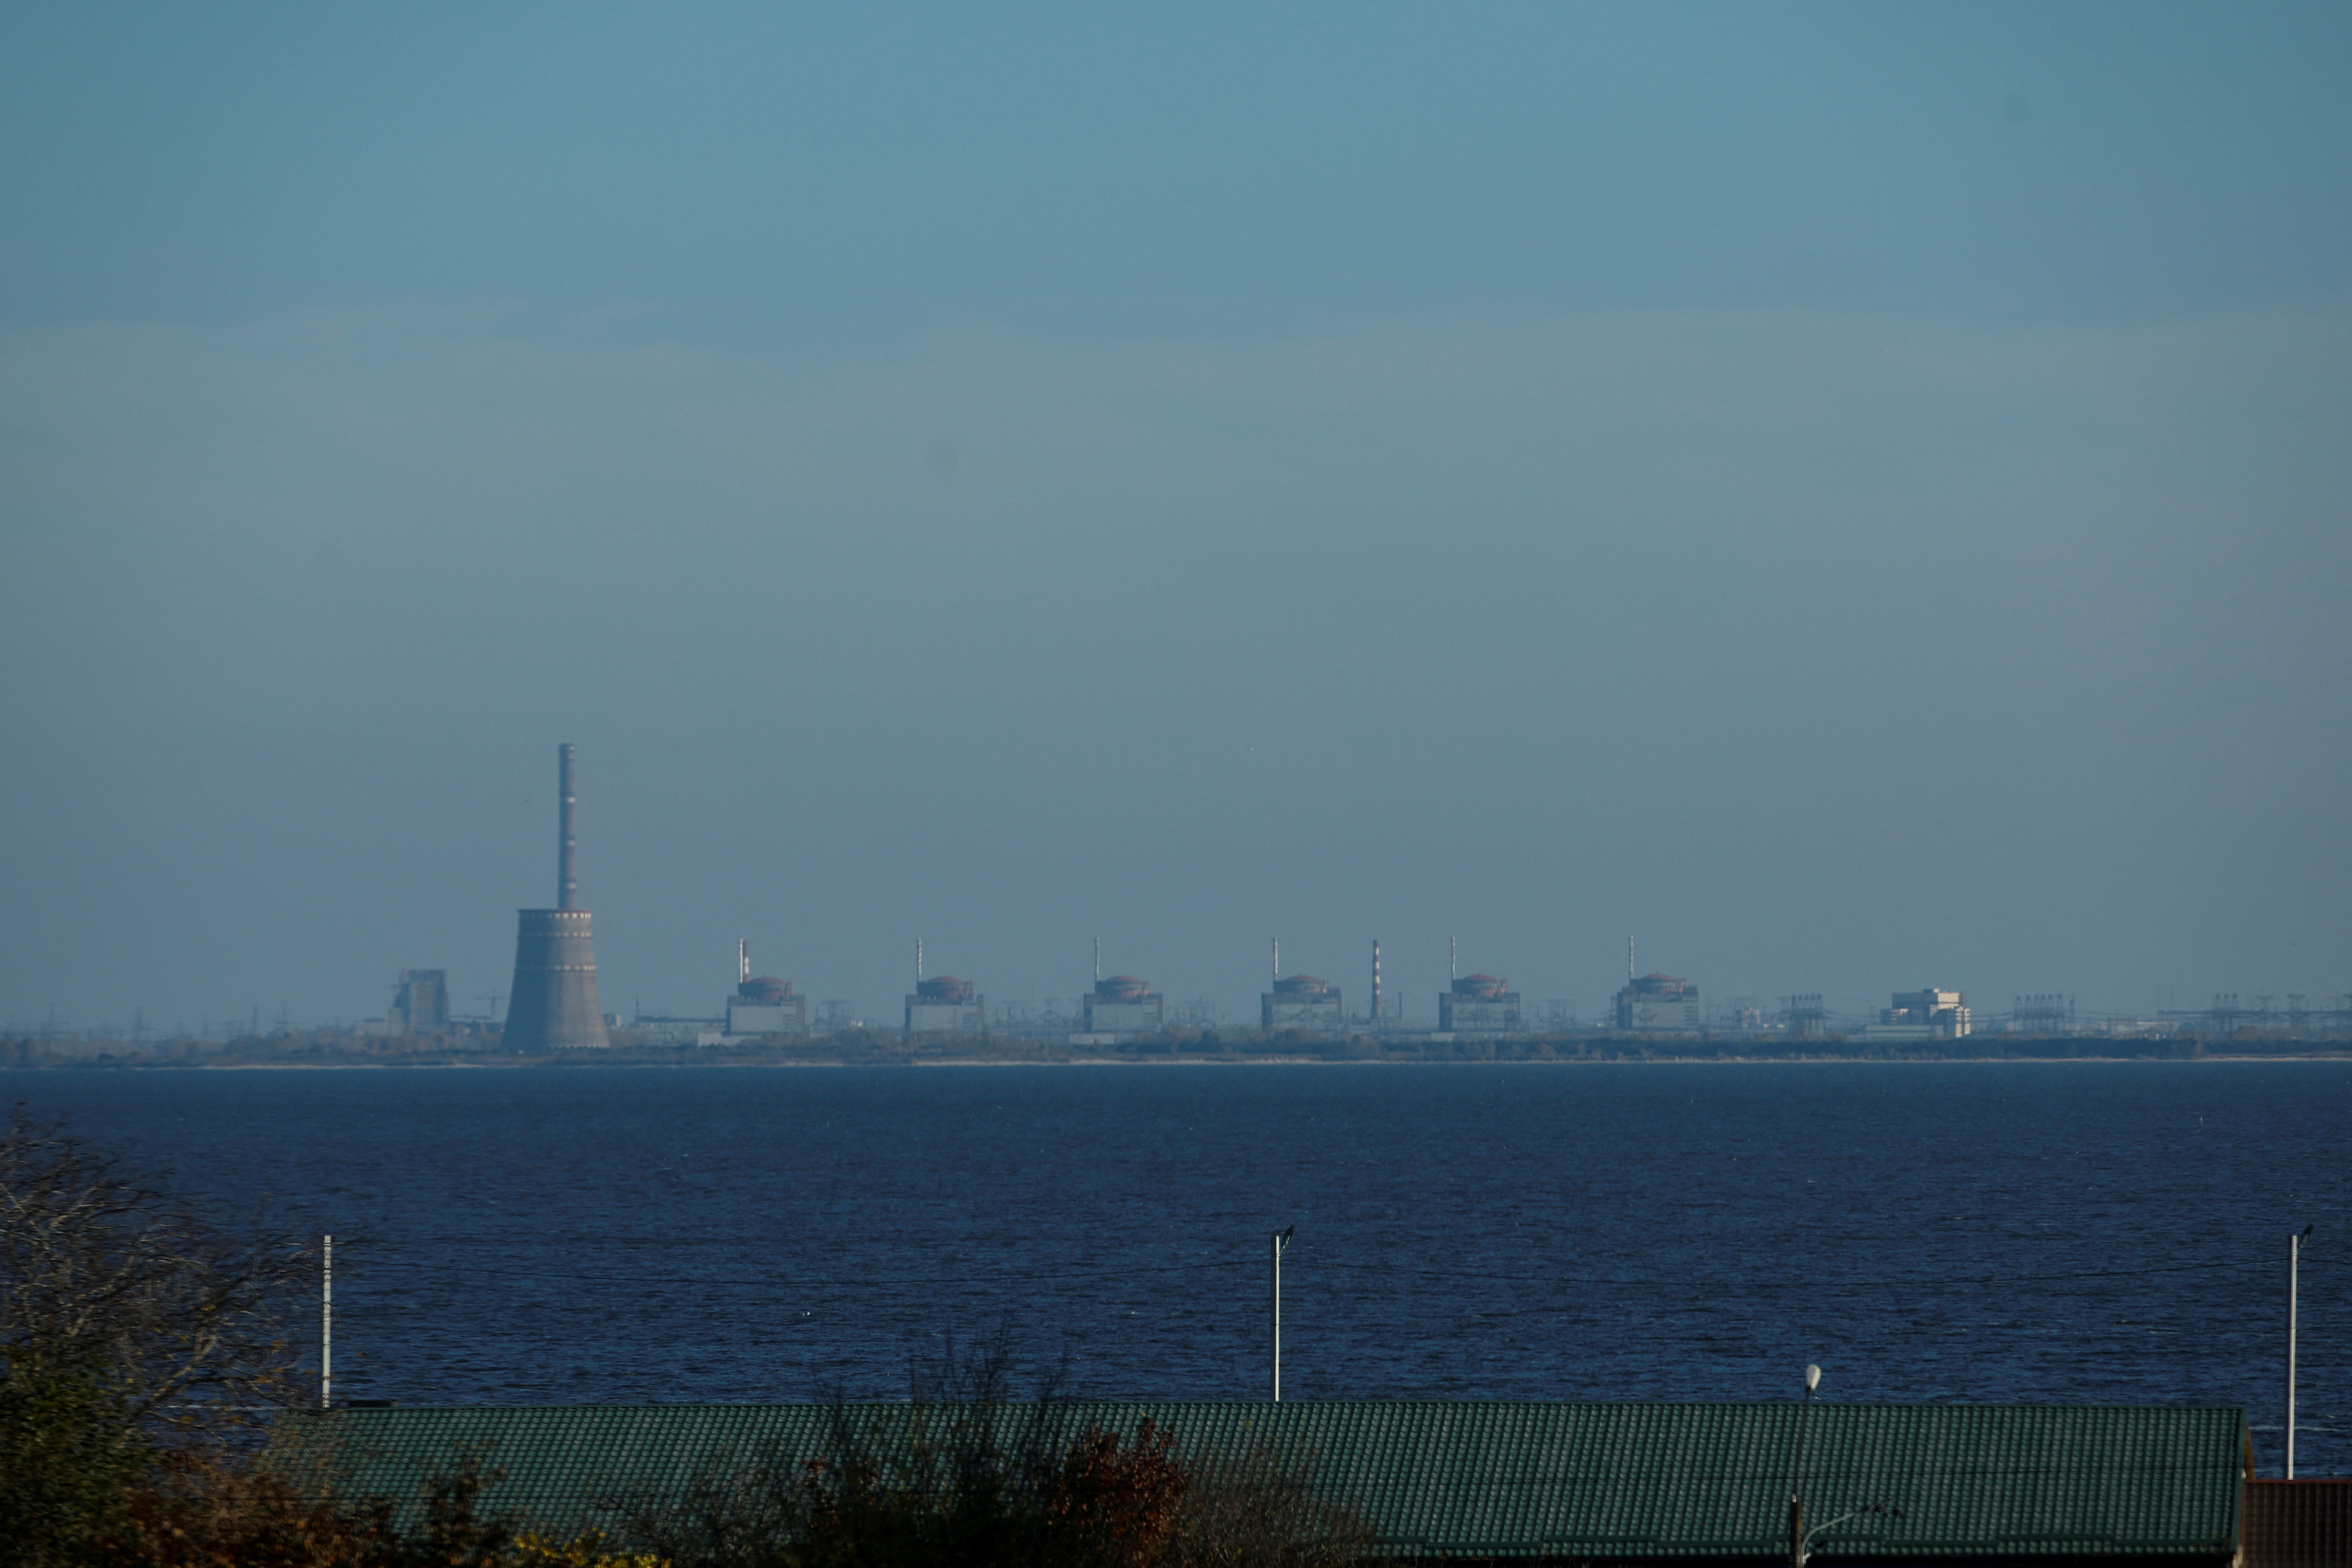 See Zaporizhia Nuclear Power Plant from the town of Nikopol